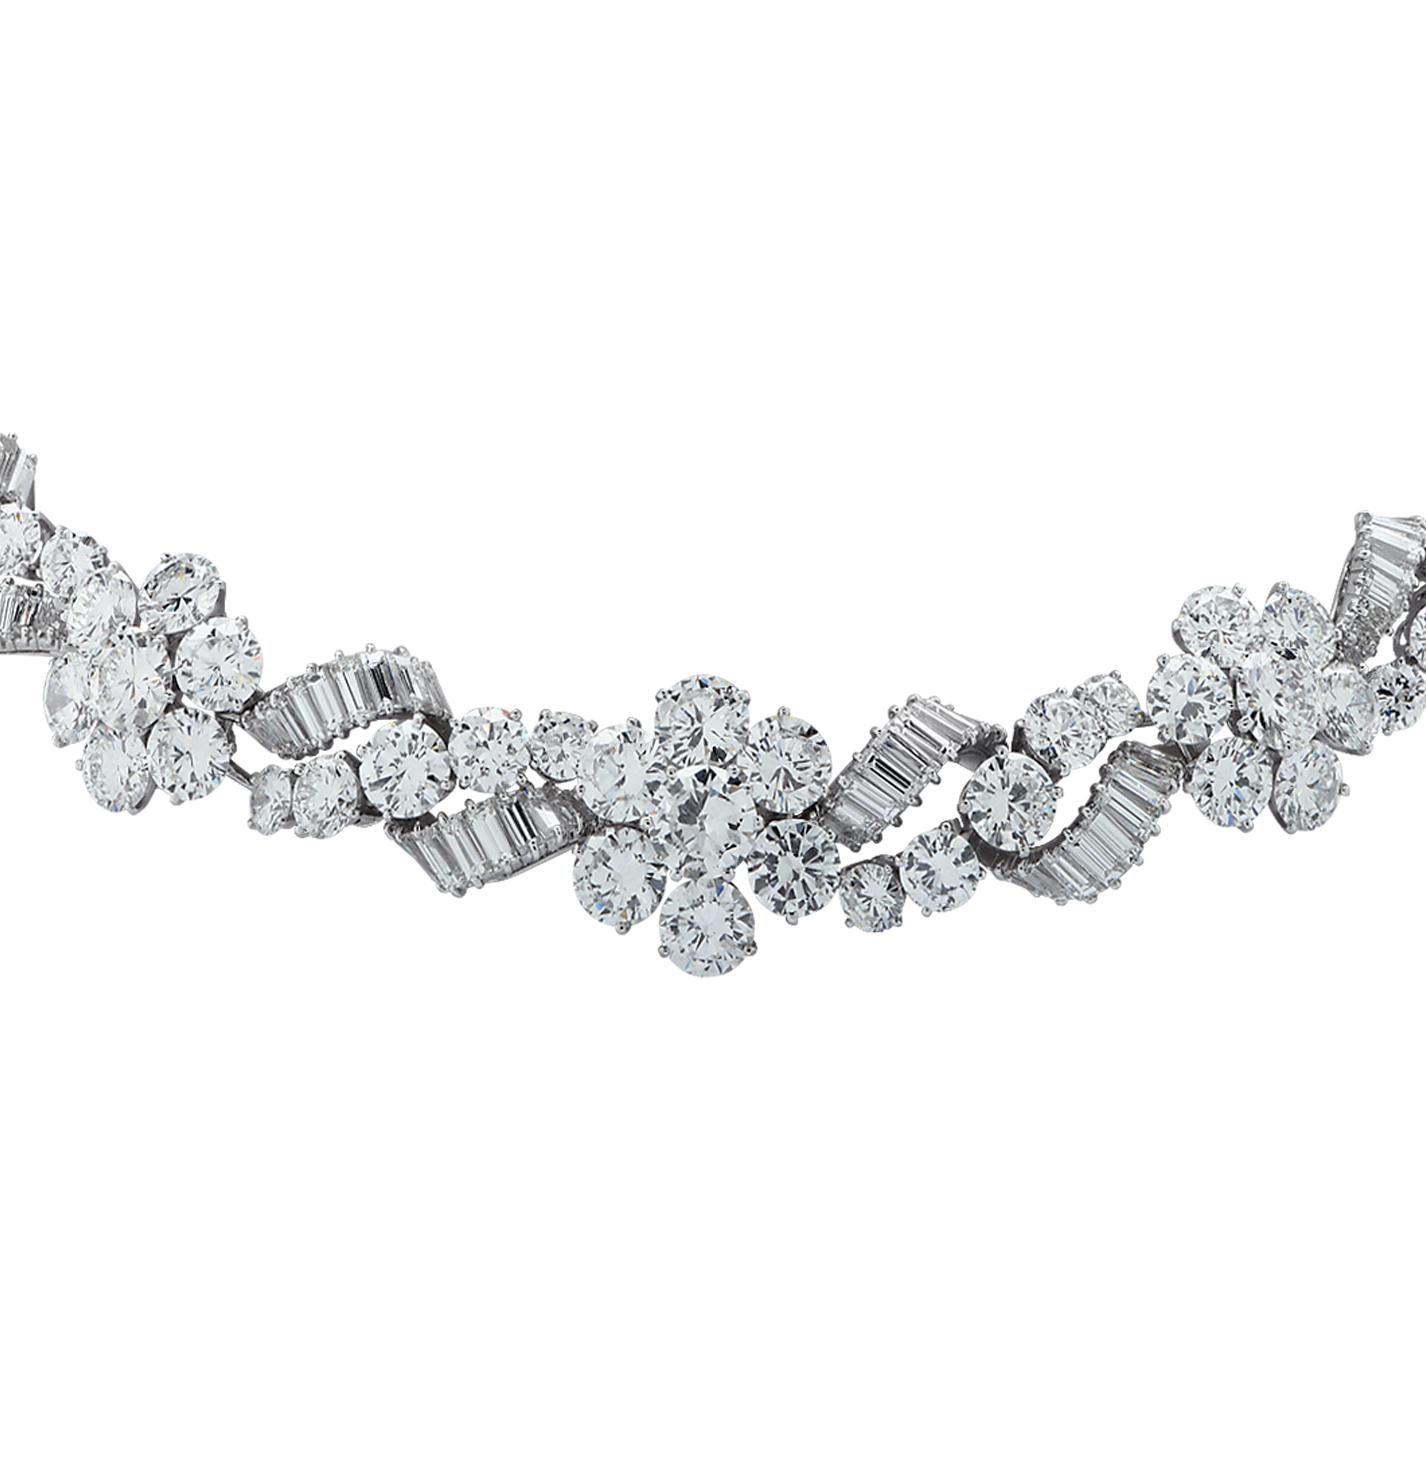 Exceptional French Bvlgari diamond necklace, circa 1960, crafted in platinum, showcasing round brilliant cut diamonds and baguette cut diamonds weighing 80.25 carats total, D-E-F color, VS-VVS clarity. Round brilliant cut diamonds are set in flower